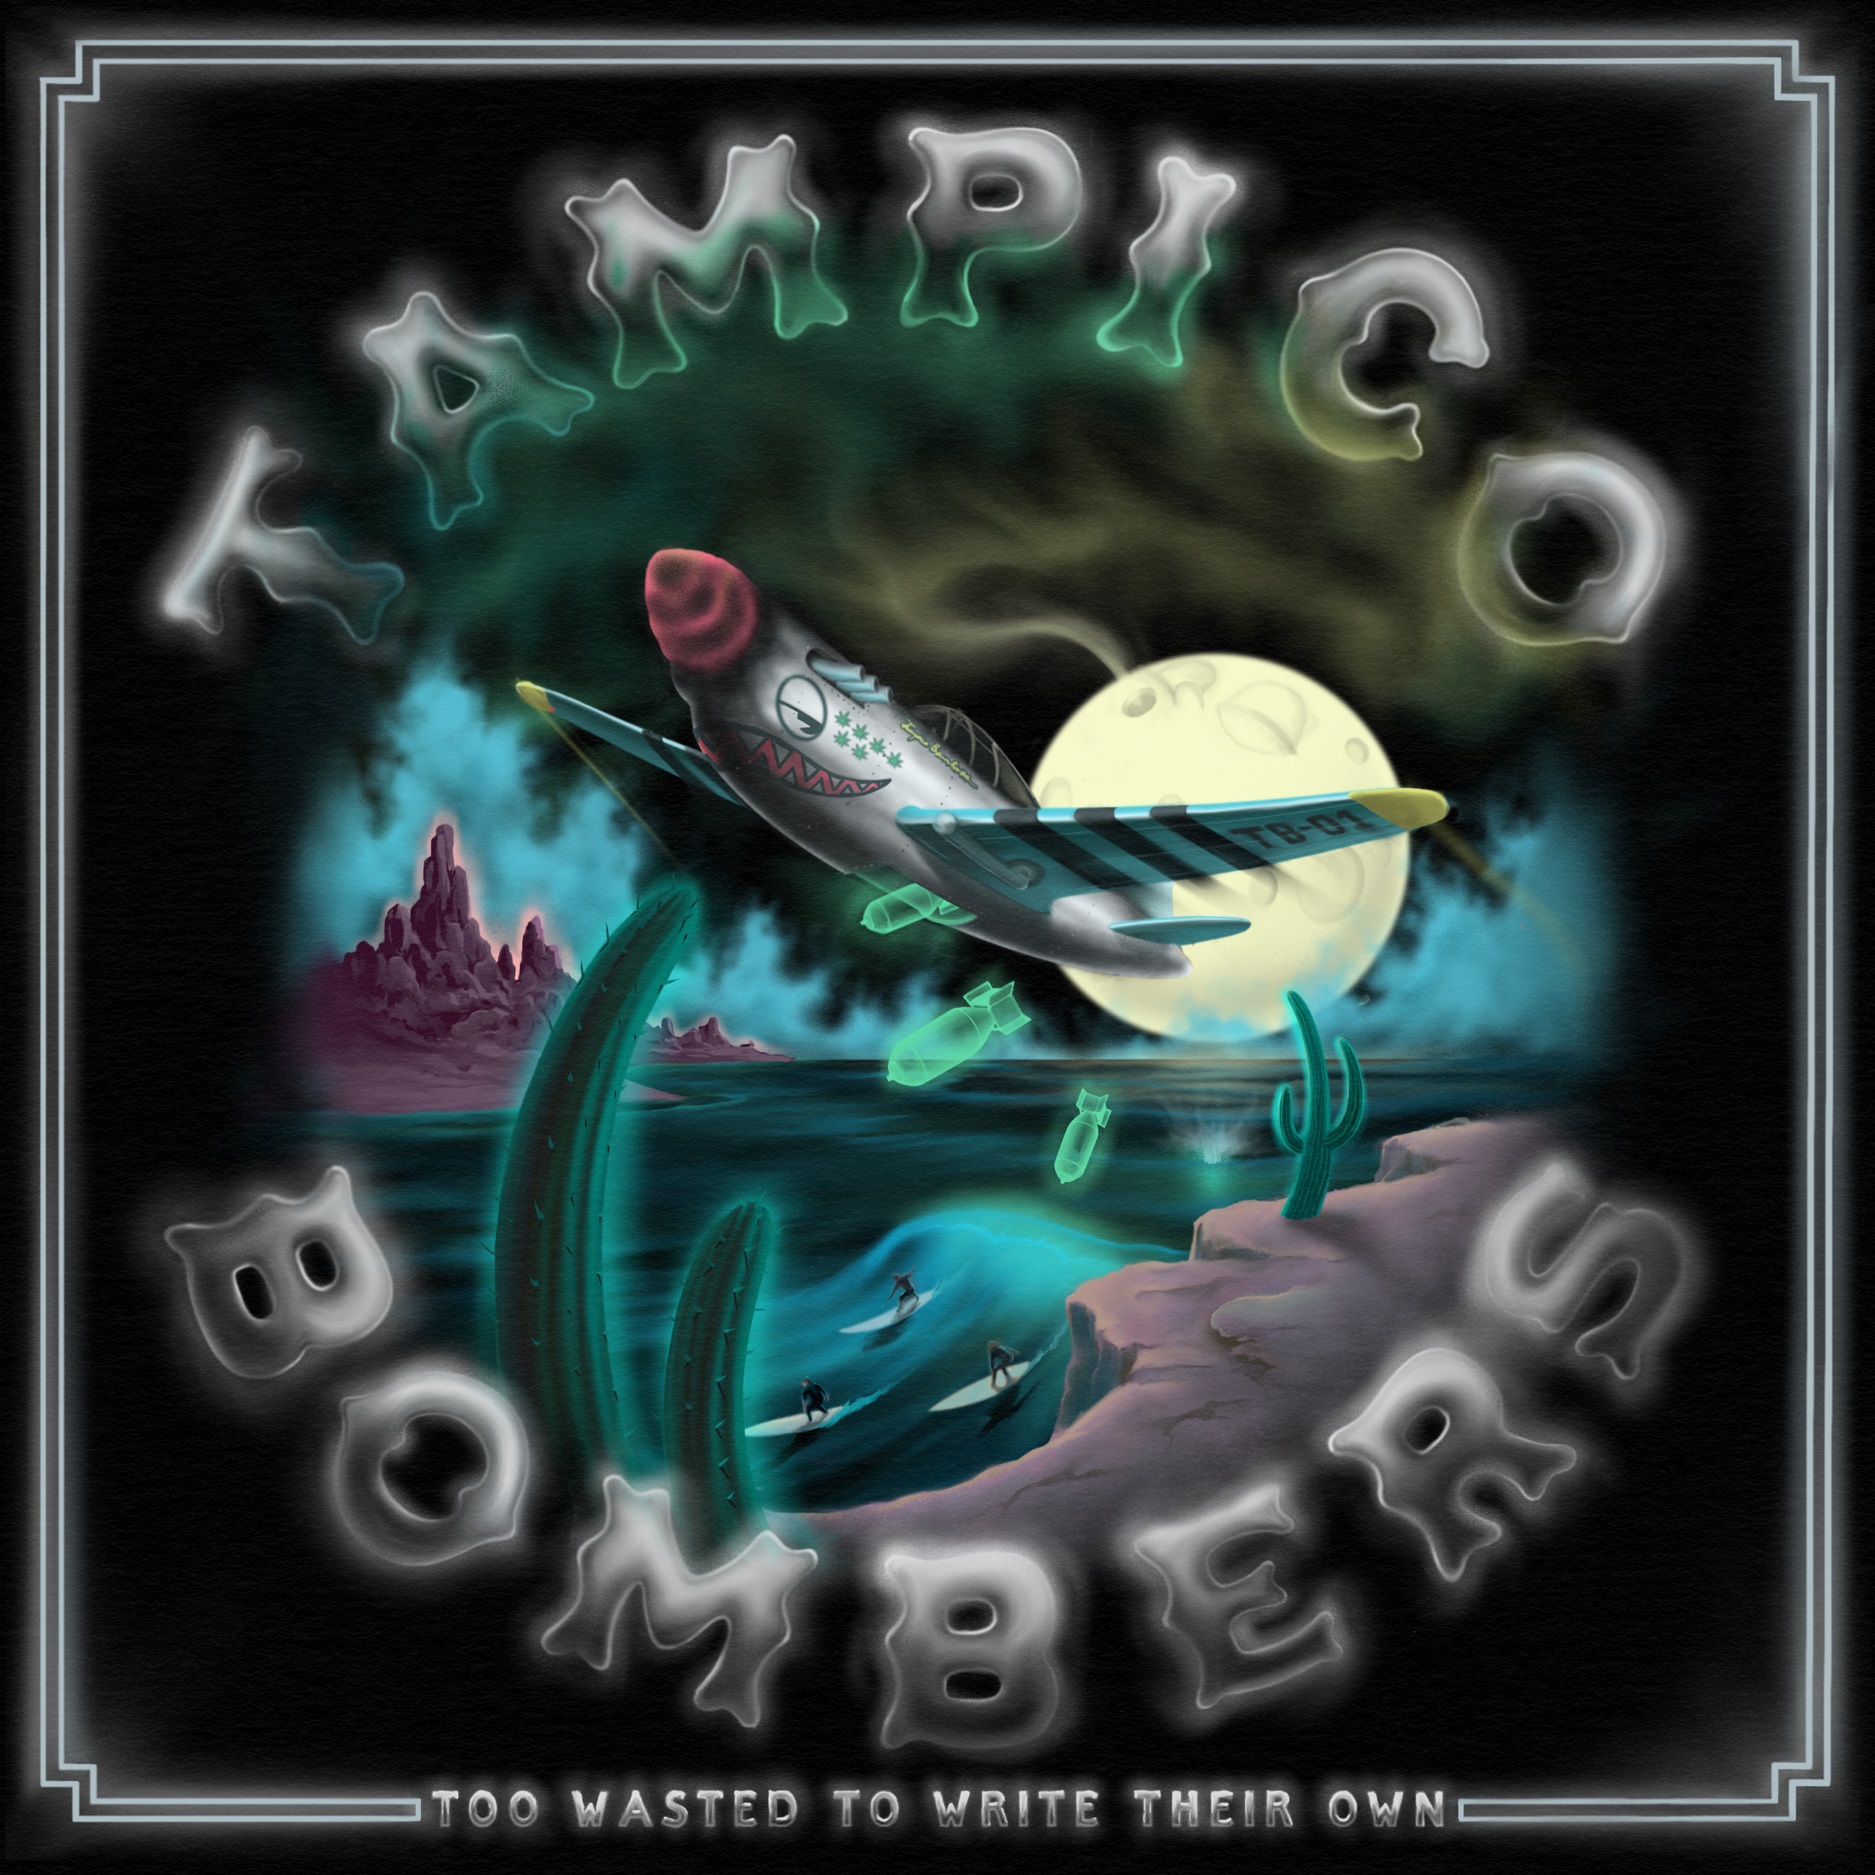 The Tampico Bombers release debut album: Too Wasted To Write Their Own